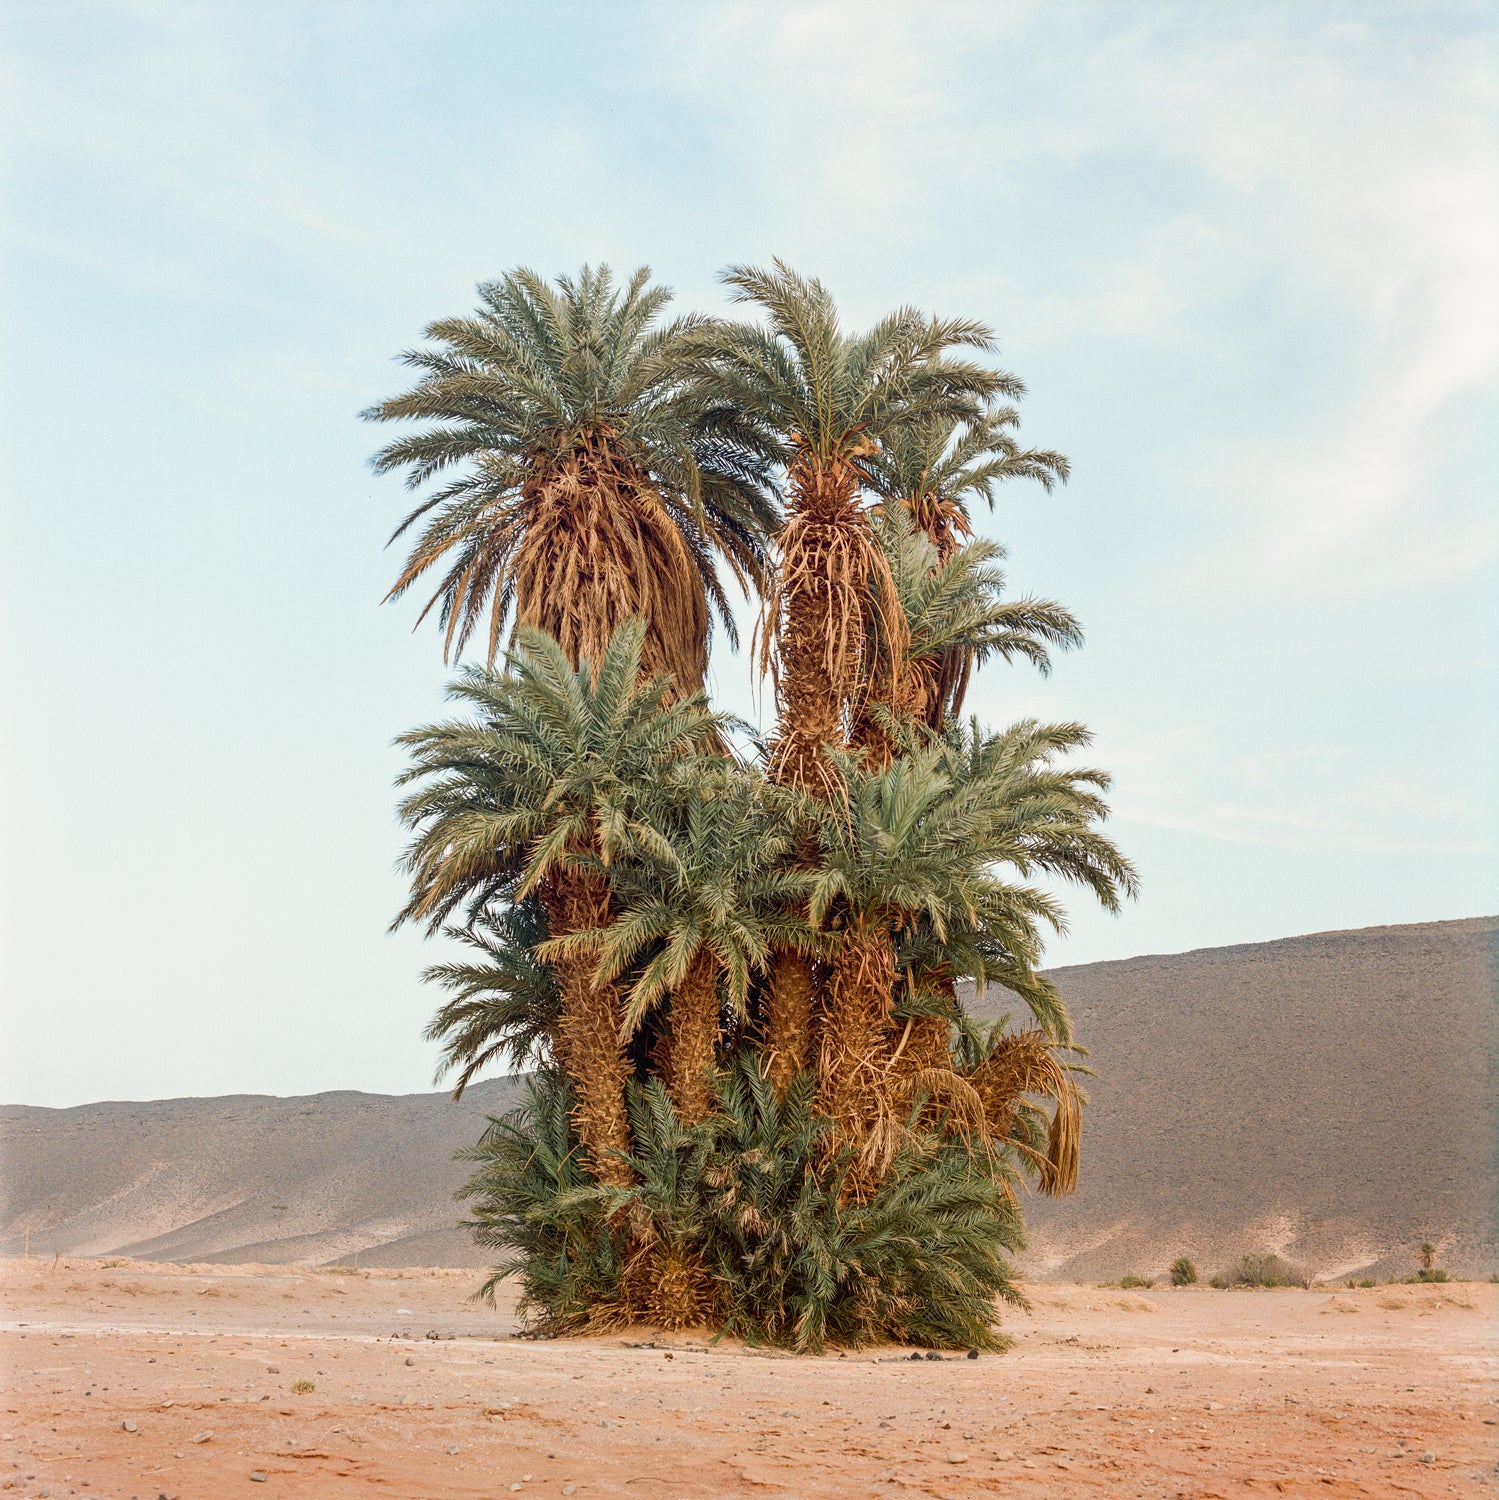 A cluster of palm trees at Morocco’s Tanseest Oasis